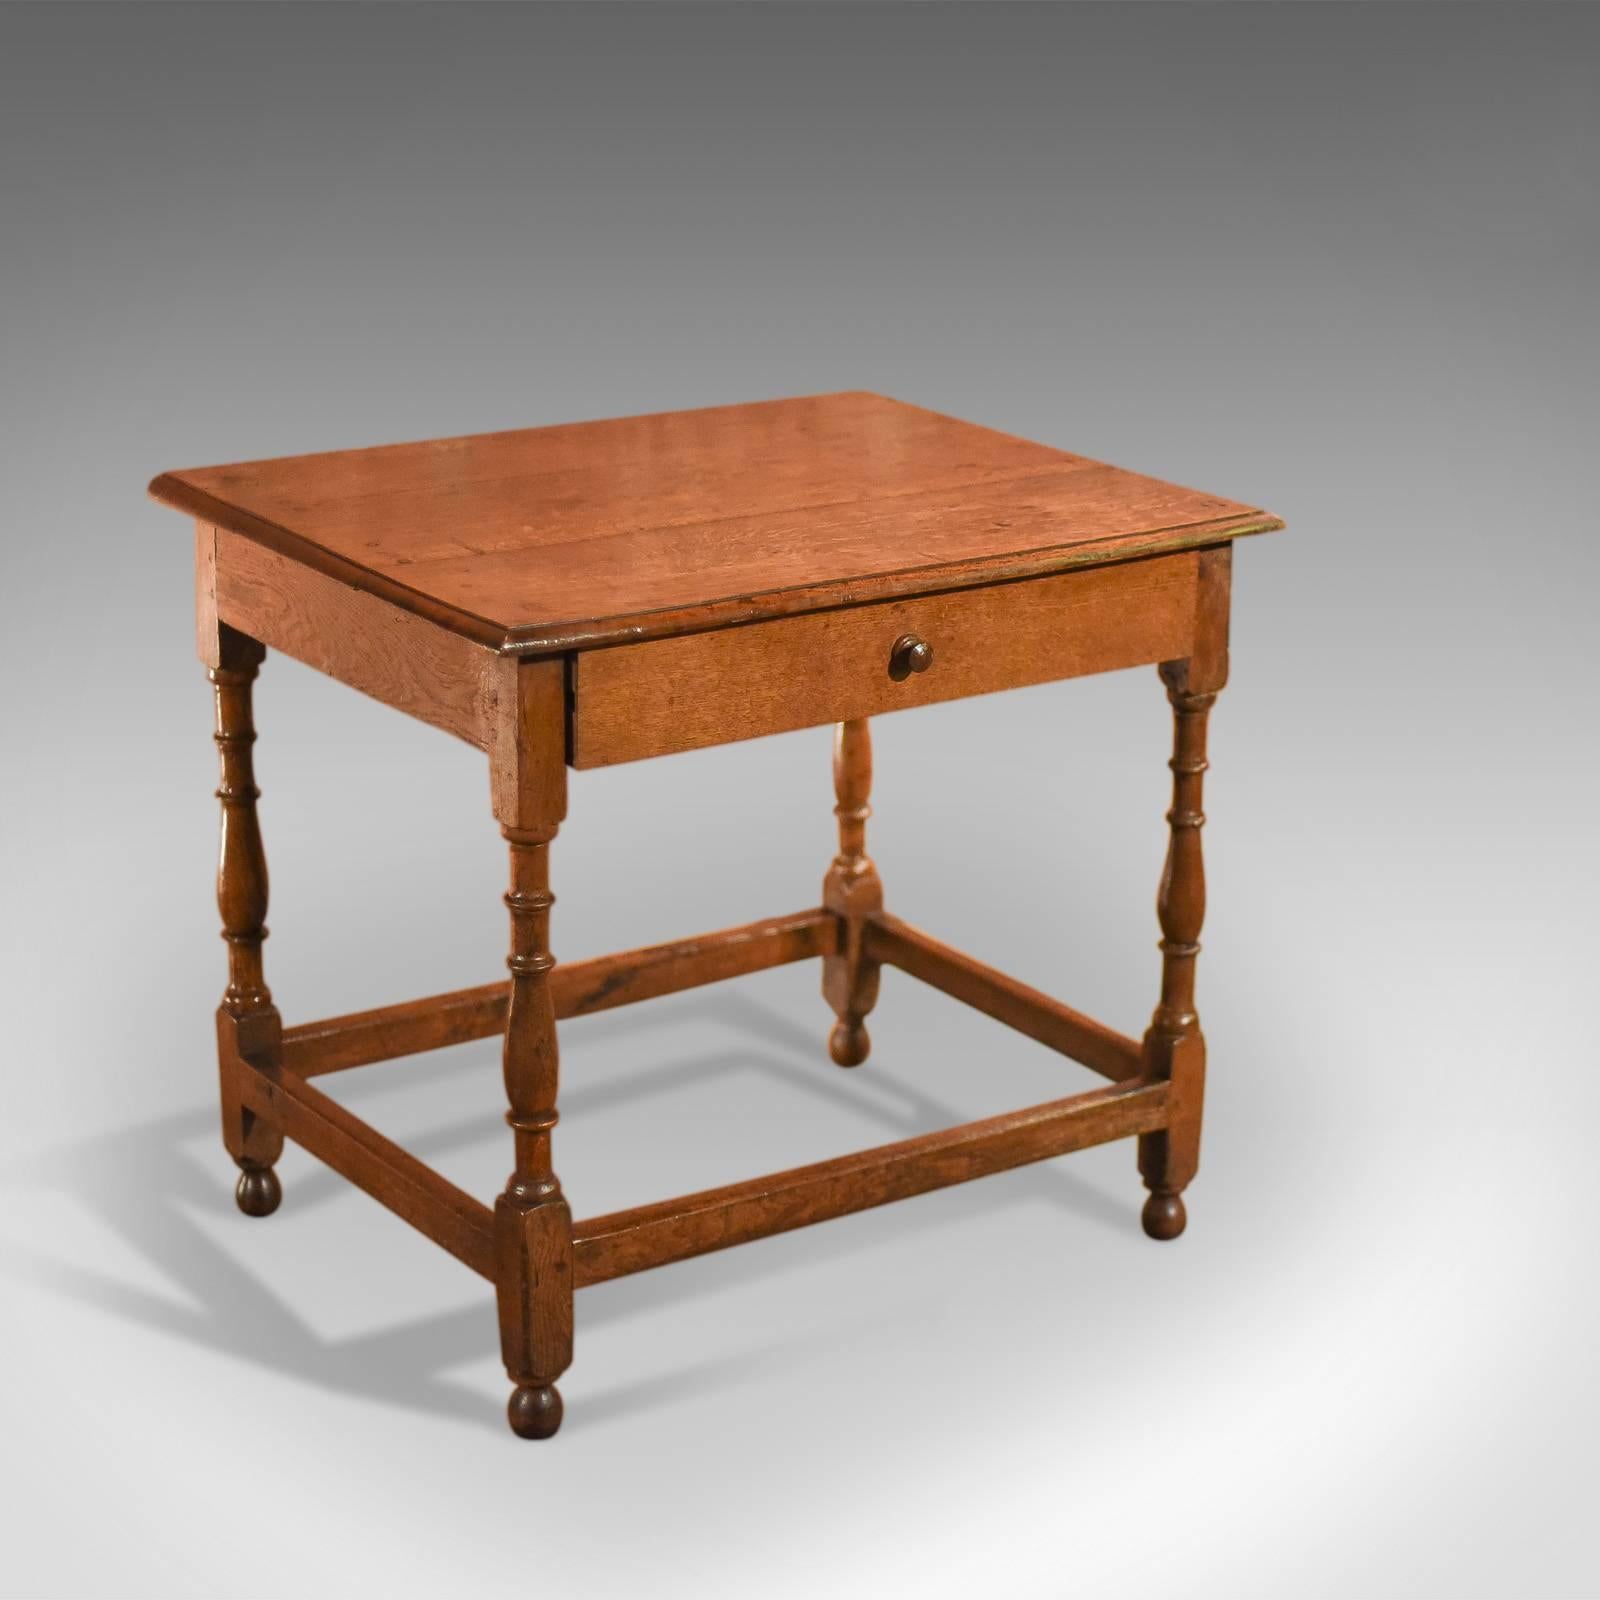 This is an antique, occasional table dating to circa 1850.

In warm honey tones with a nice aged patina, the three plank top displays good grain detail with feint medullary rays and is finished with a moulded edge detail.

Raised on ball feet